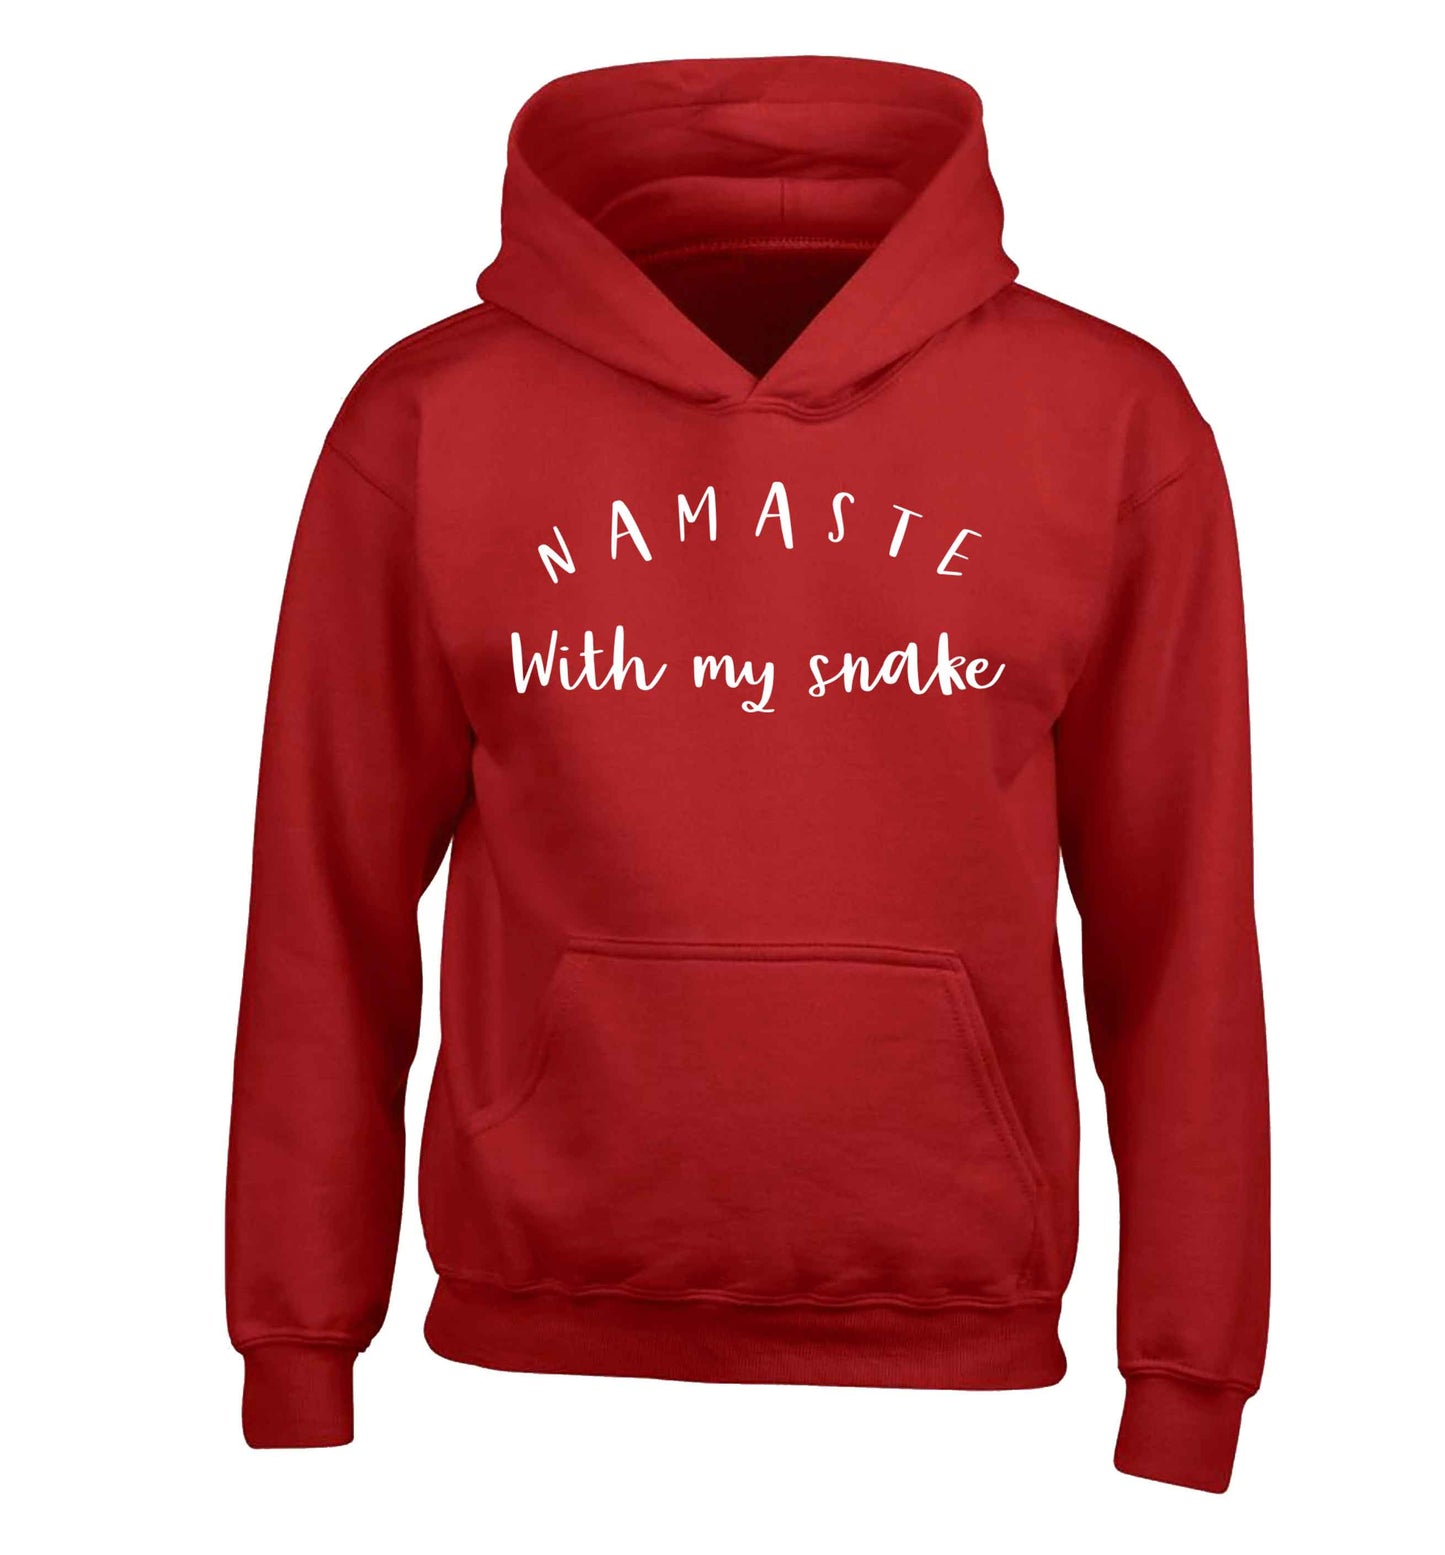 Namaste with my snake children's red hoodie 12-13 Years